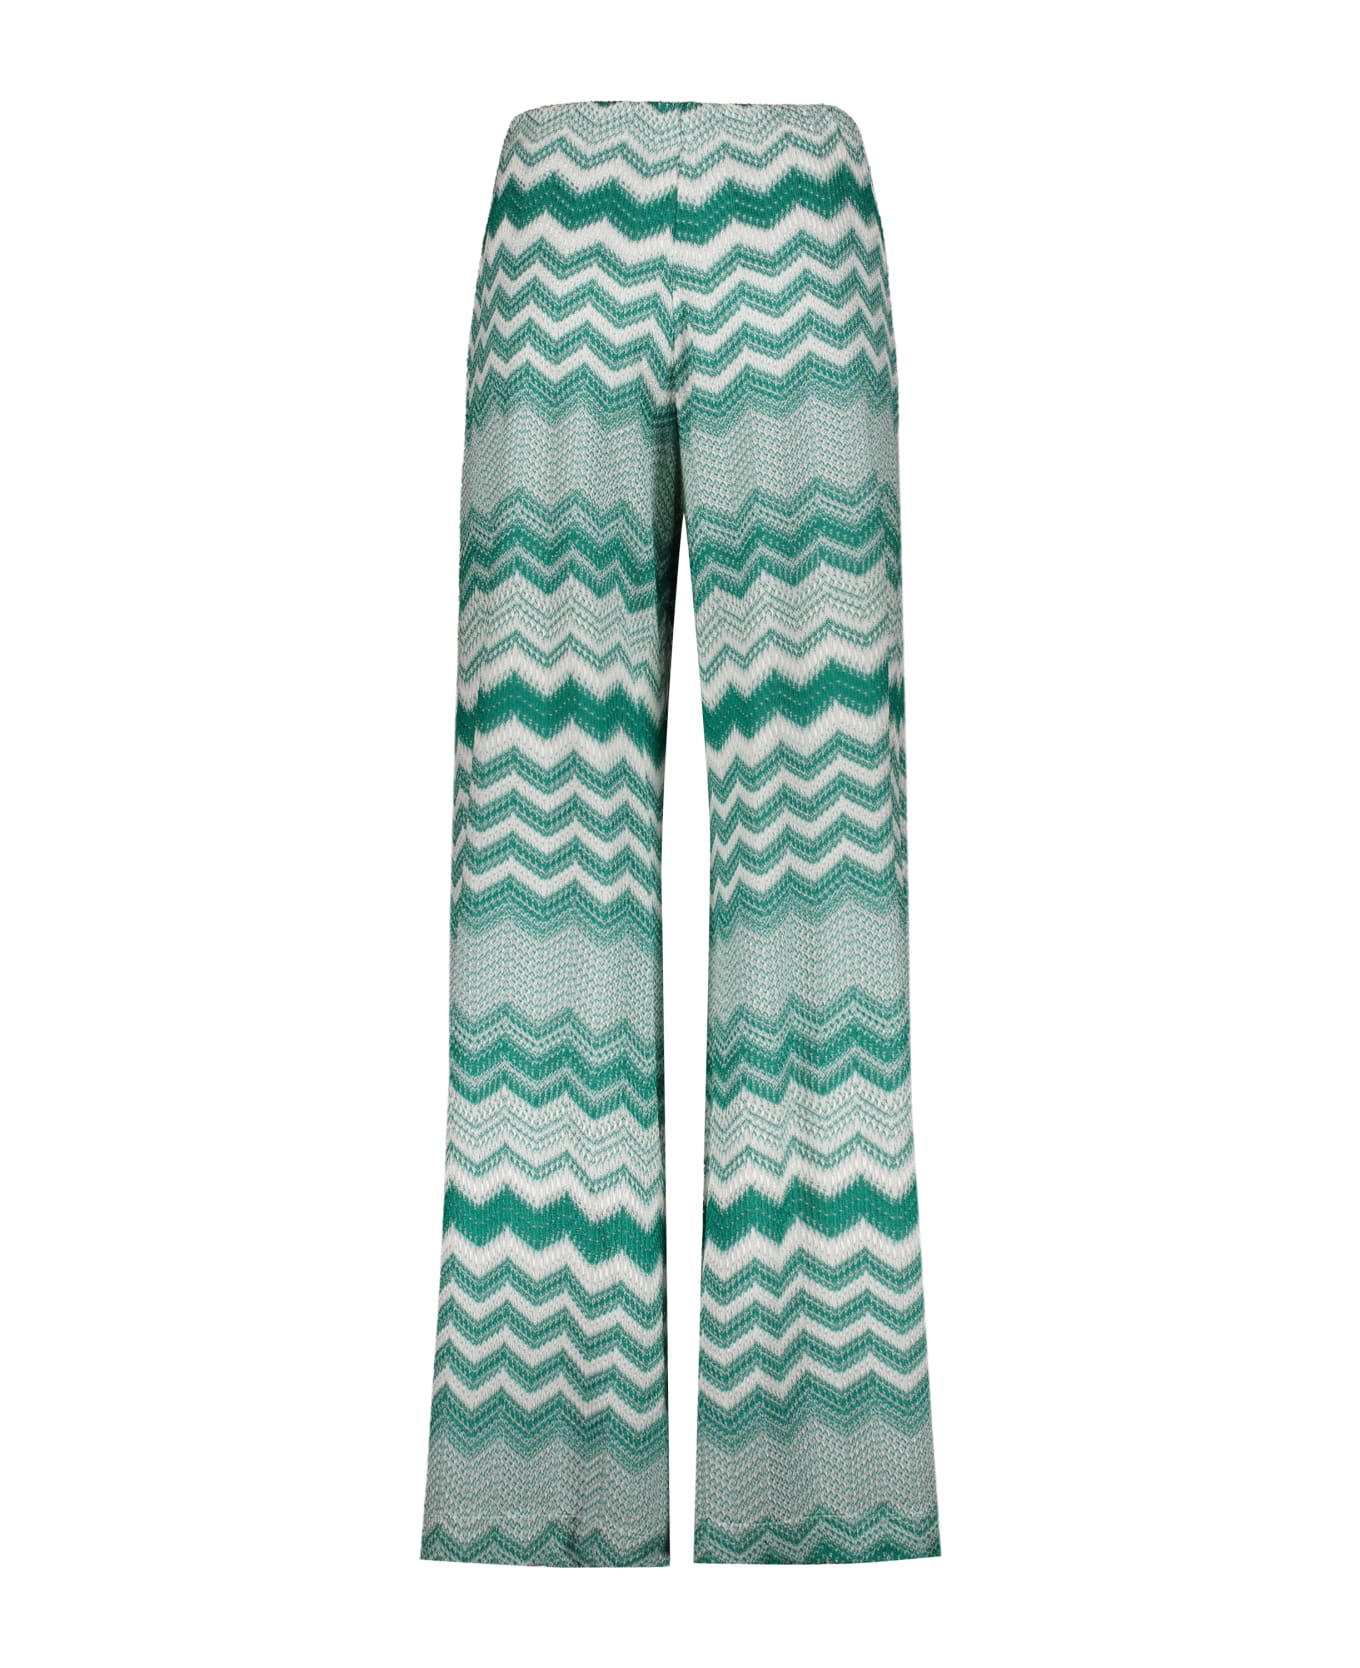 M Missoni Chevron Knitted Palazzo Trousers - green ボトムス